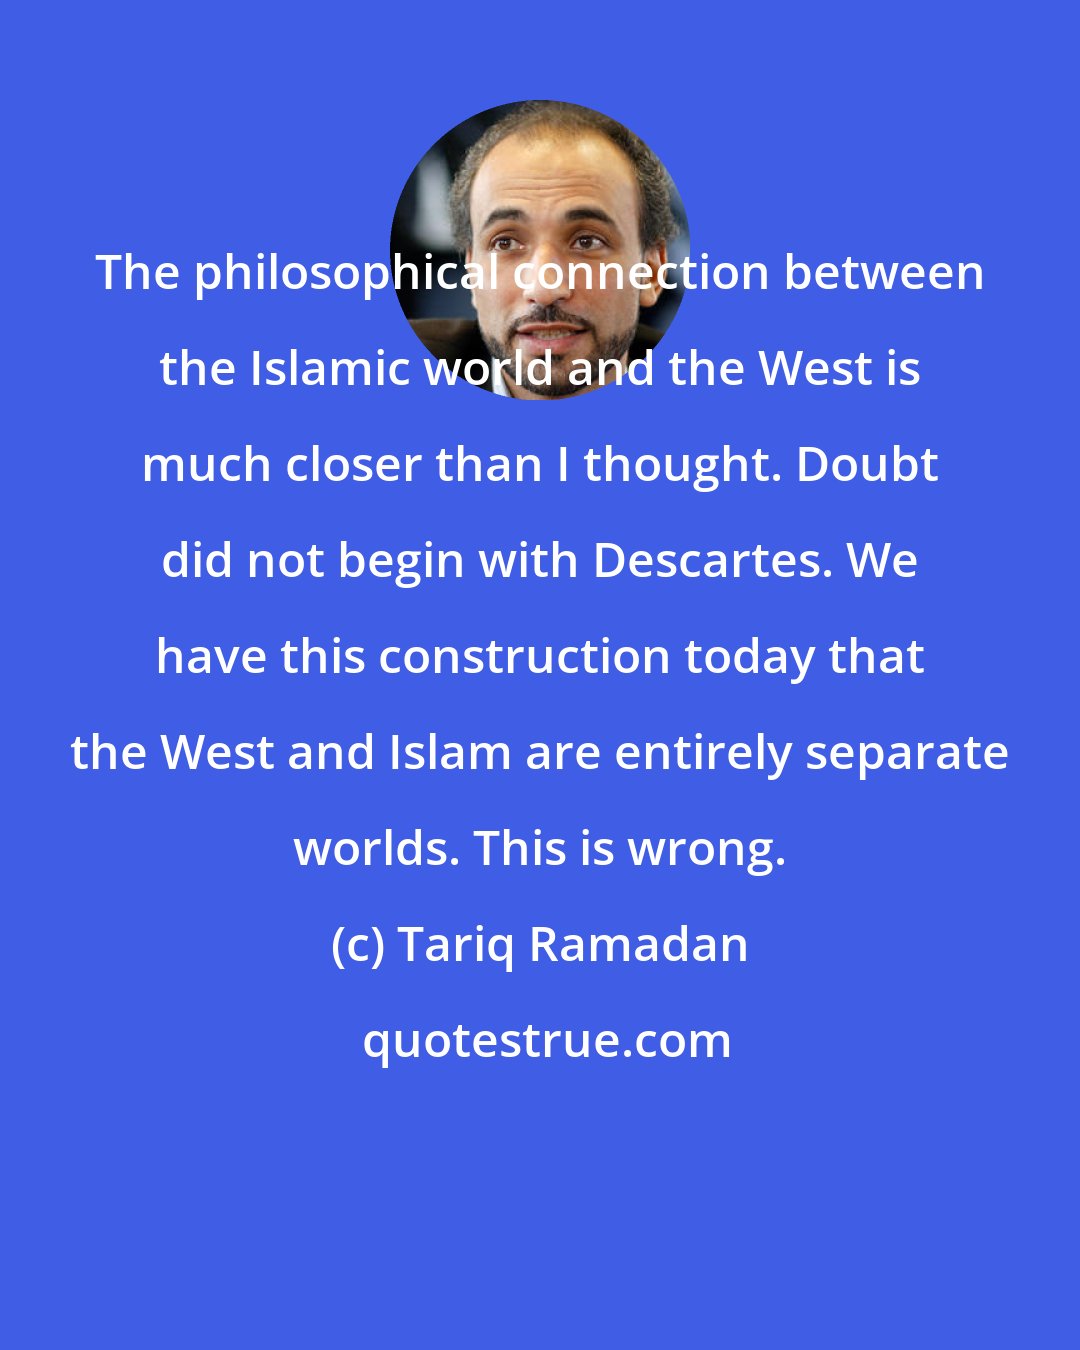 Tariq Ramadan: The philosophical connection between the Islamic world and the West is much closer than I thought. Doubt did not begin with Descartes. We have this construction today that the West and Islam are entirely separate worlds. This is wrong.